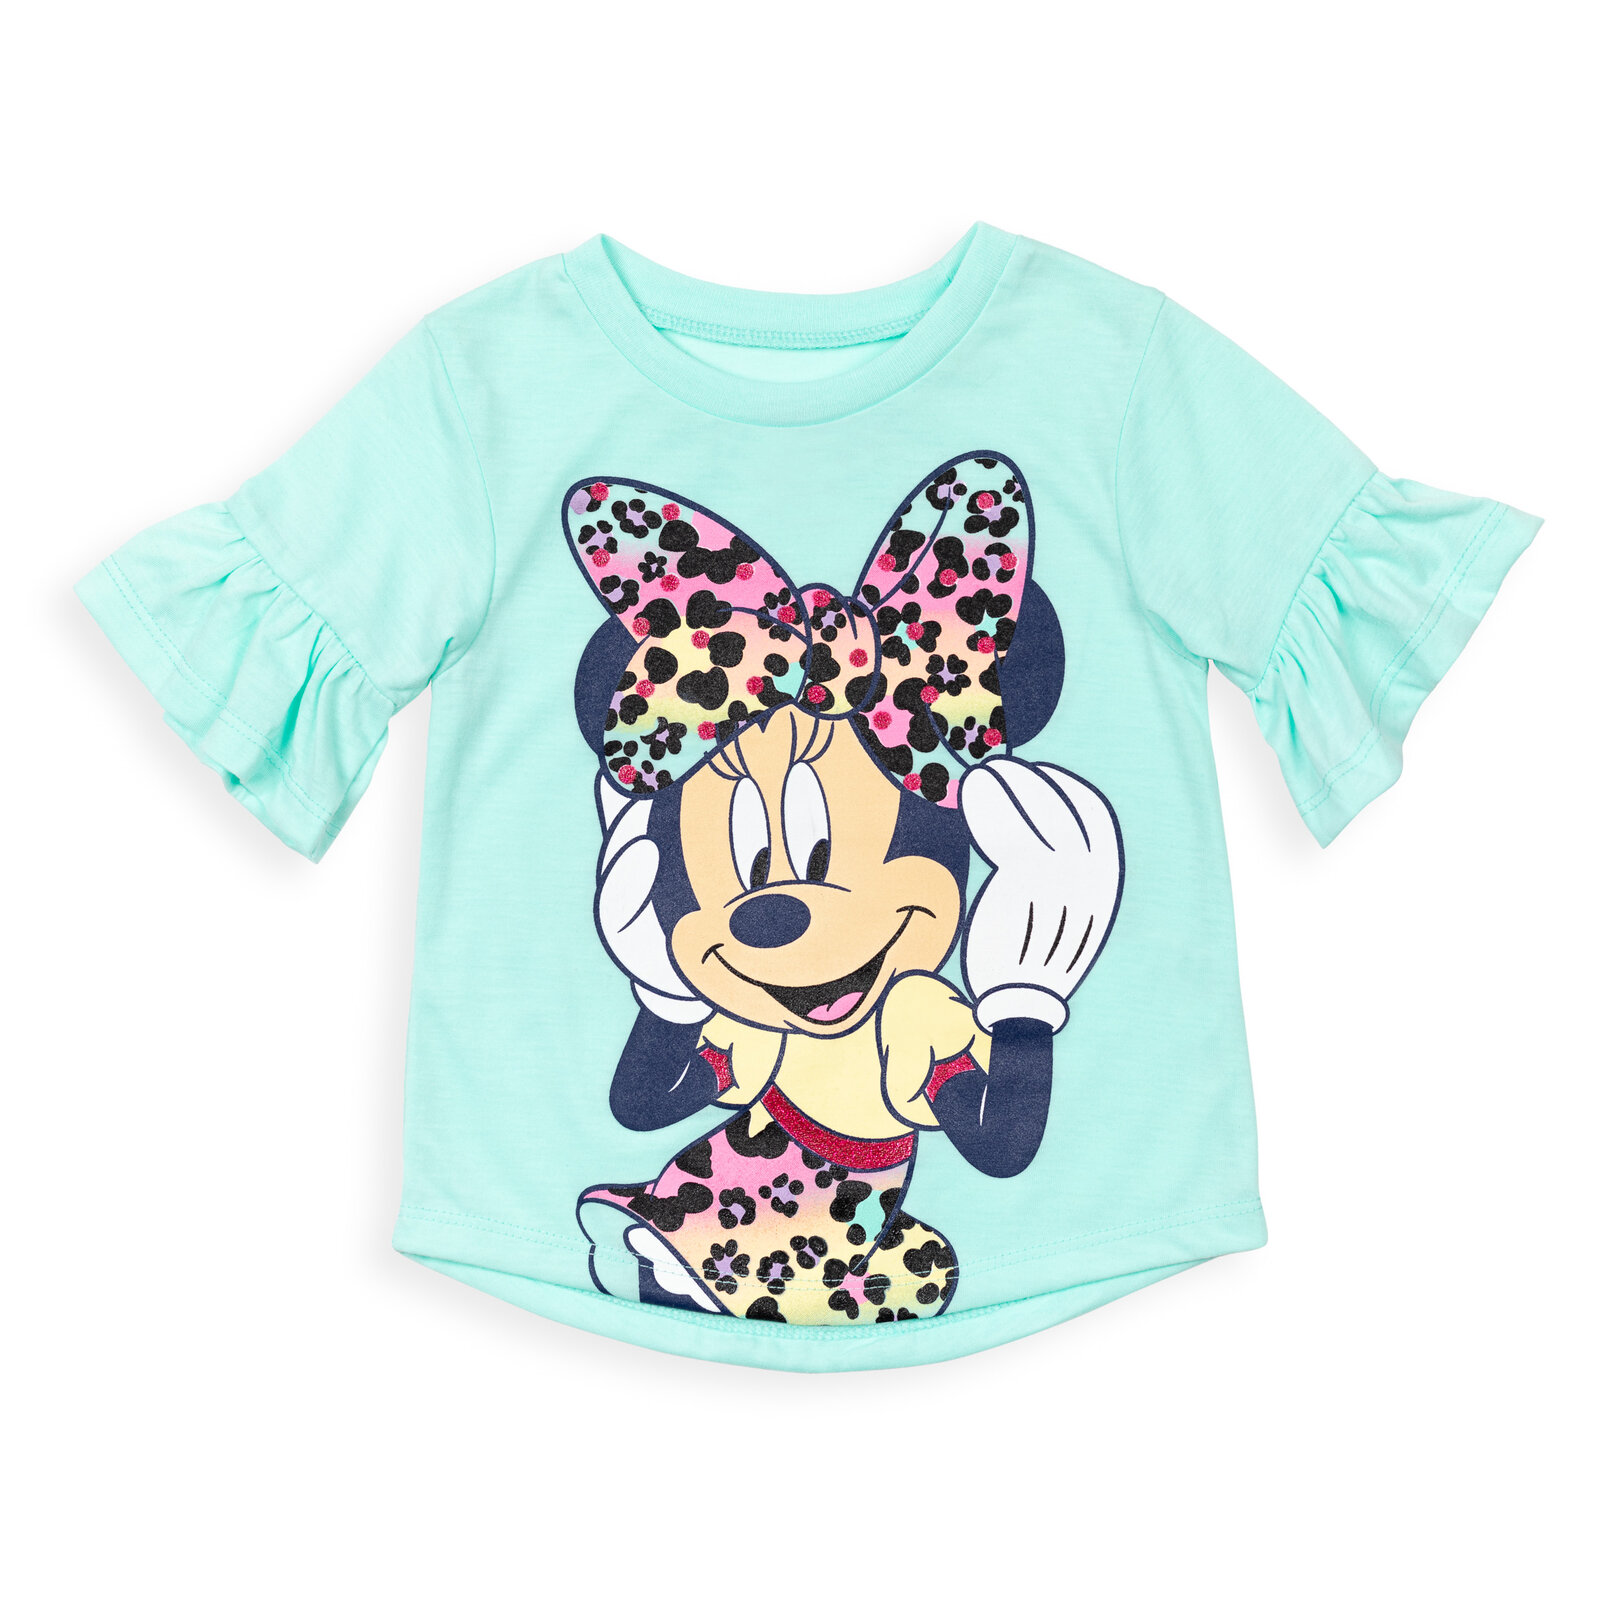 Disney Minnie Mouse Little Girls T-Shirt and Leggings Outfit Set Infant to Big Kid - image 3 of 5